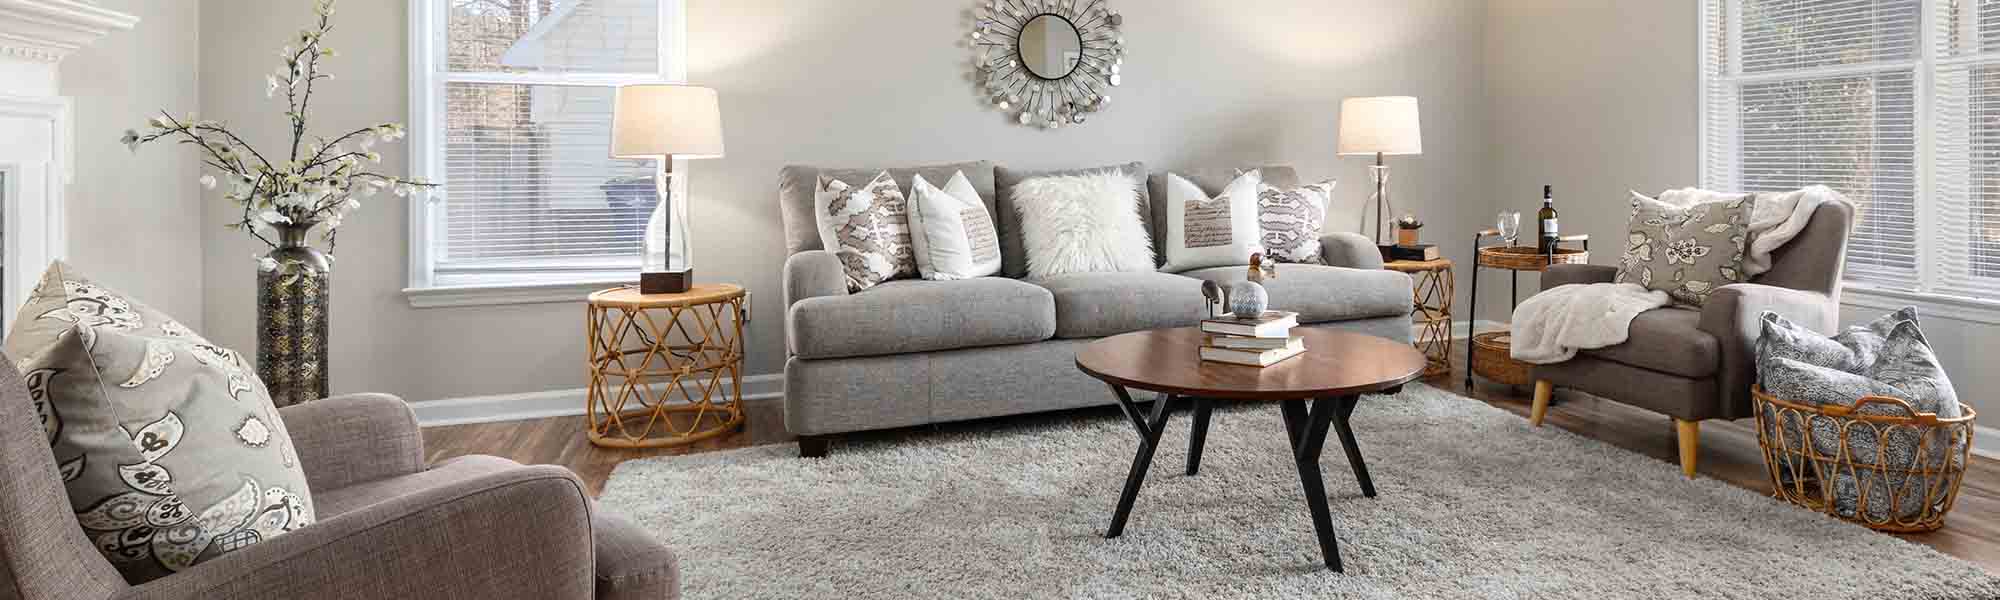 Stylish furniture: a sofa, an armchair and a table in the living room with a wonderful design